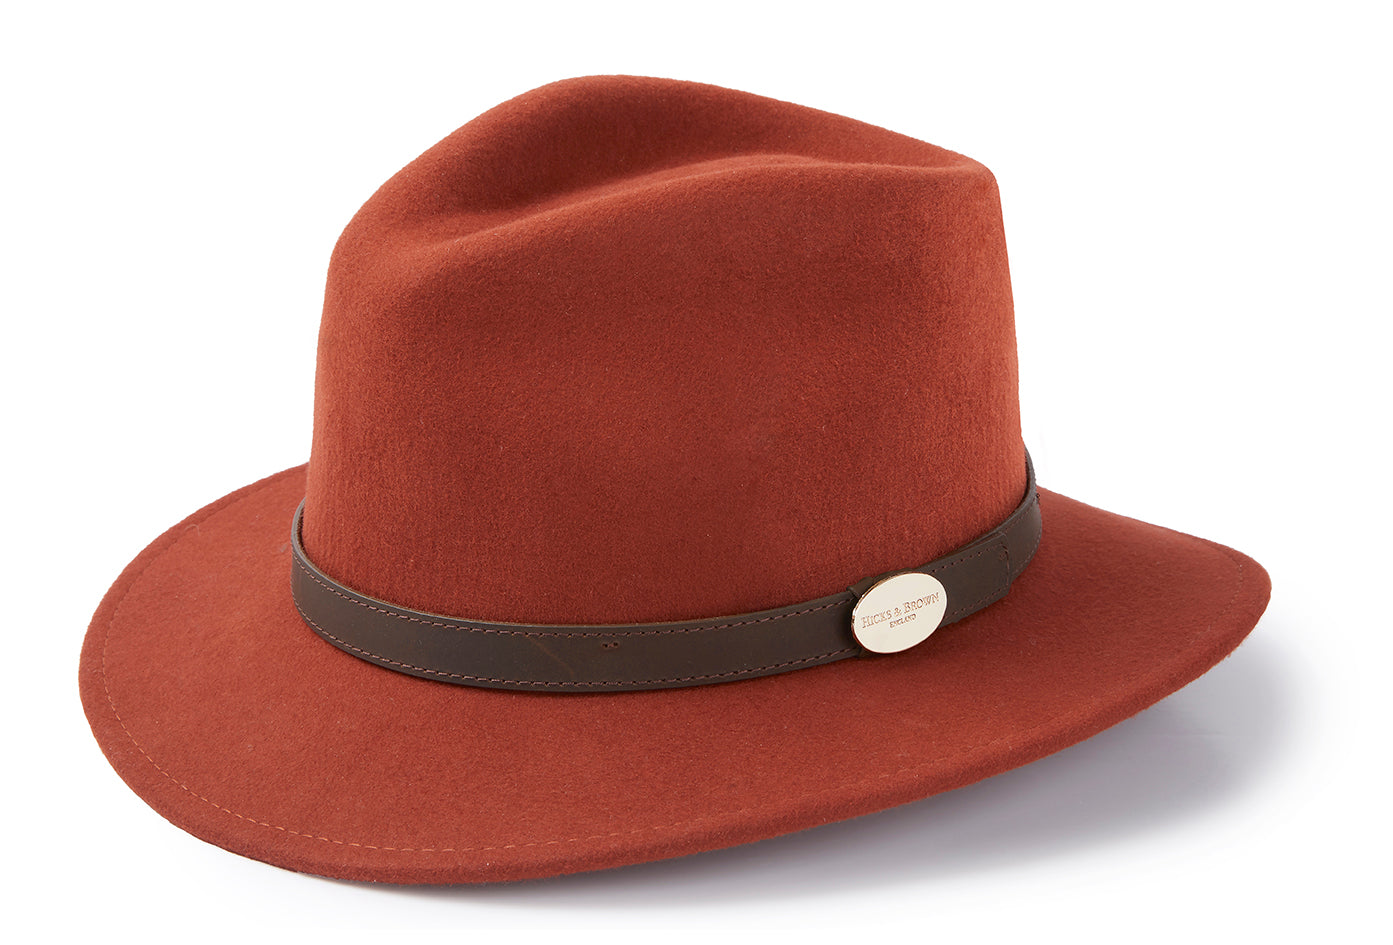 Hicks & Brown The Suffolk Fedora in Cinnamon (No Feather)